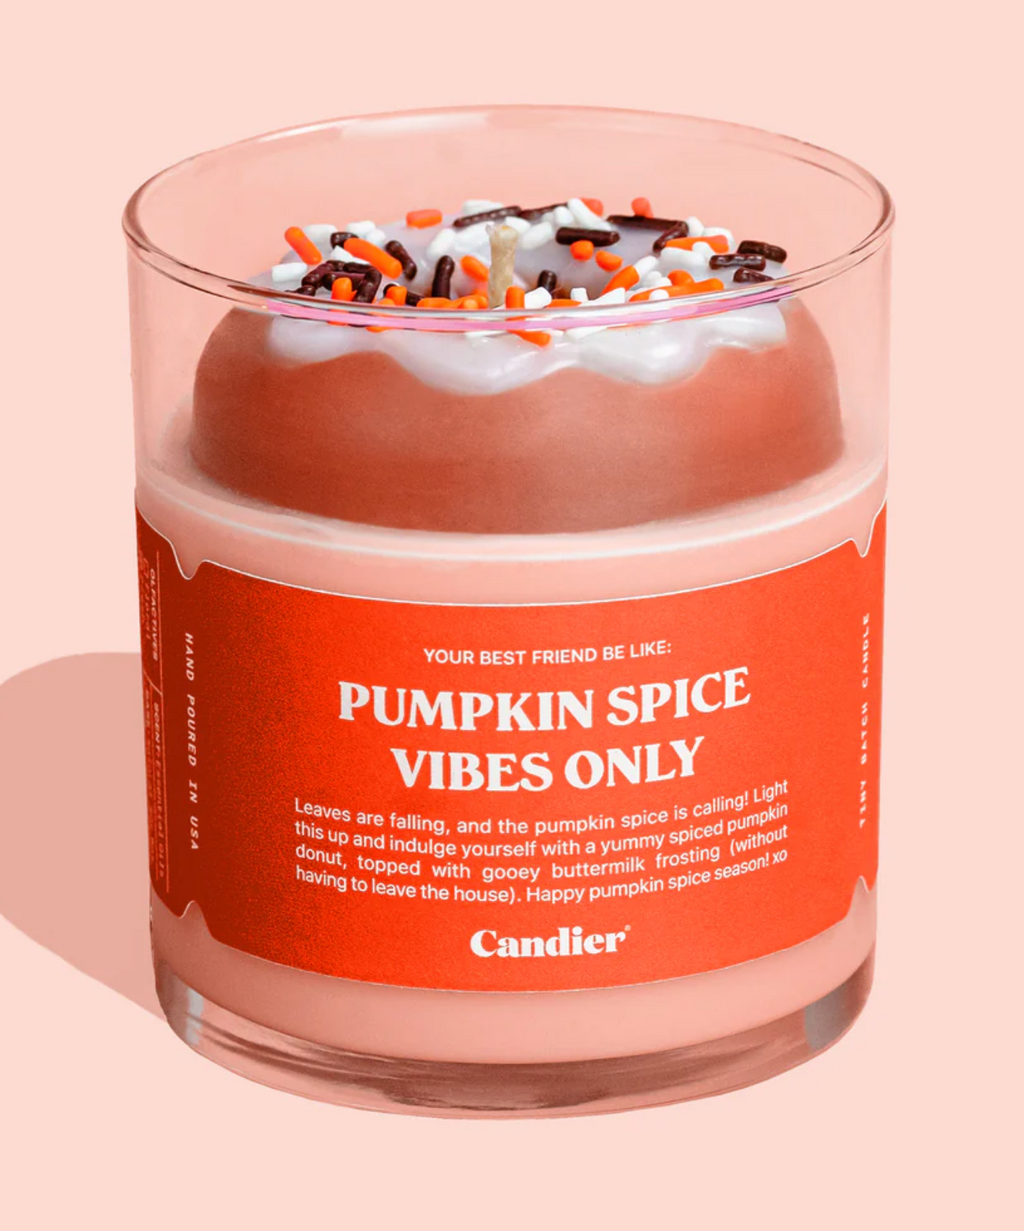 Pumpkin Spice Vibes Only Candle